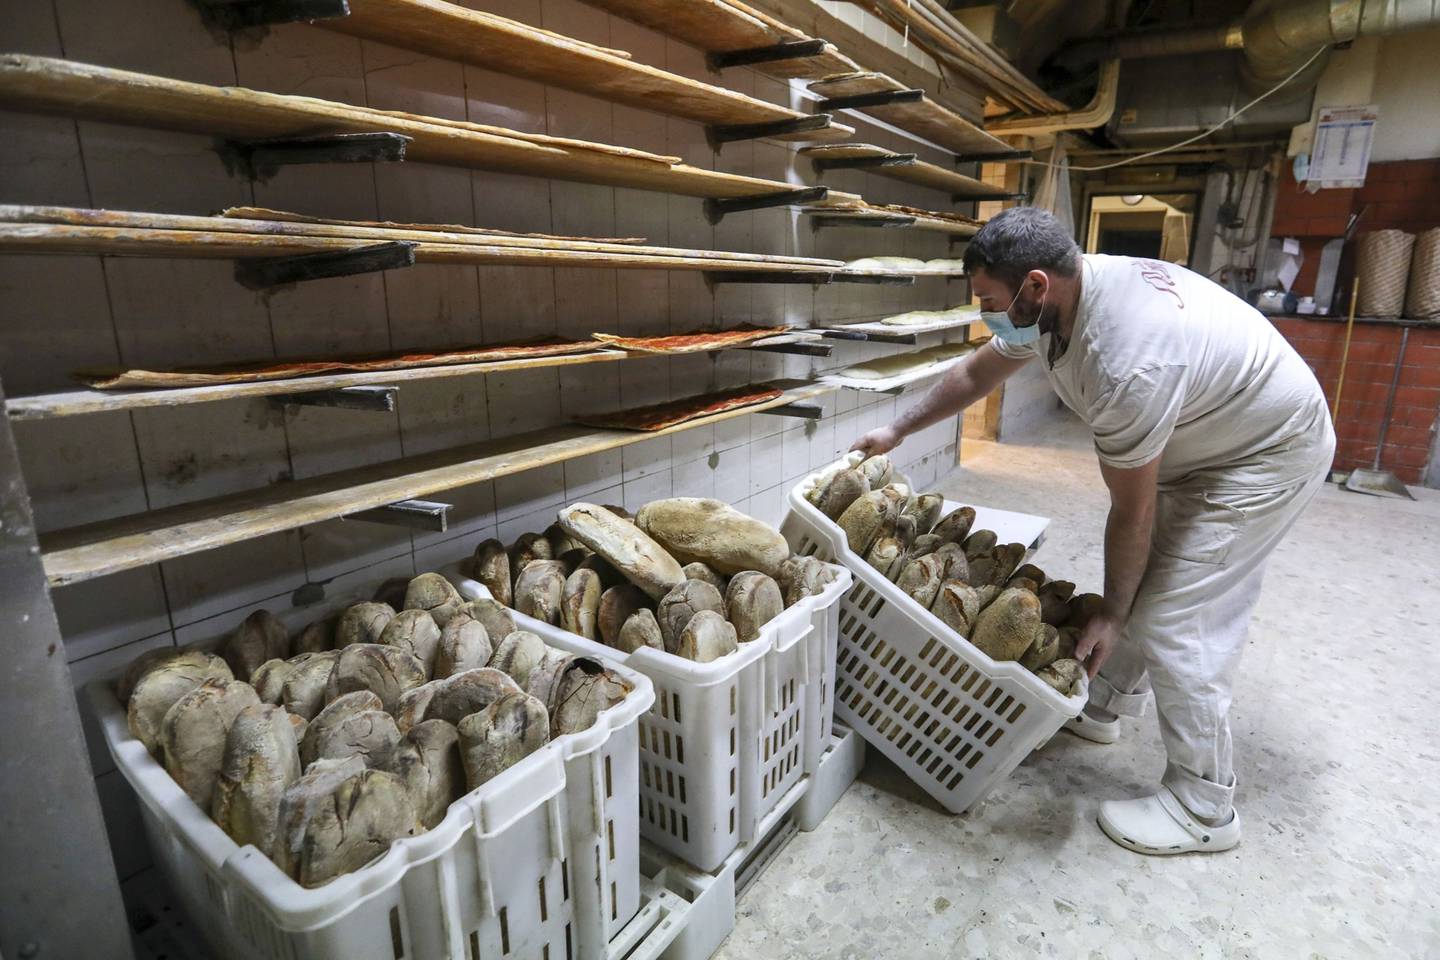 Loaves of freshly-baked bread stored in crates at a bakery in Rome, Italy, on Wednesday, March 9, 2022. Wheat futures swung wildly between gains and losses Tuesday after climbing to unprecedented heights as Russia's attack on Ukraine disrupts global food supplies. Photographer: Alessia Pierdomenico/Bloomberg